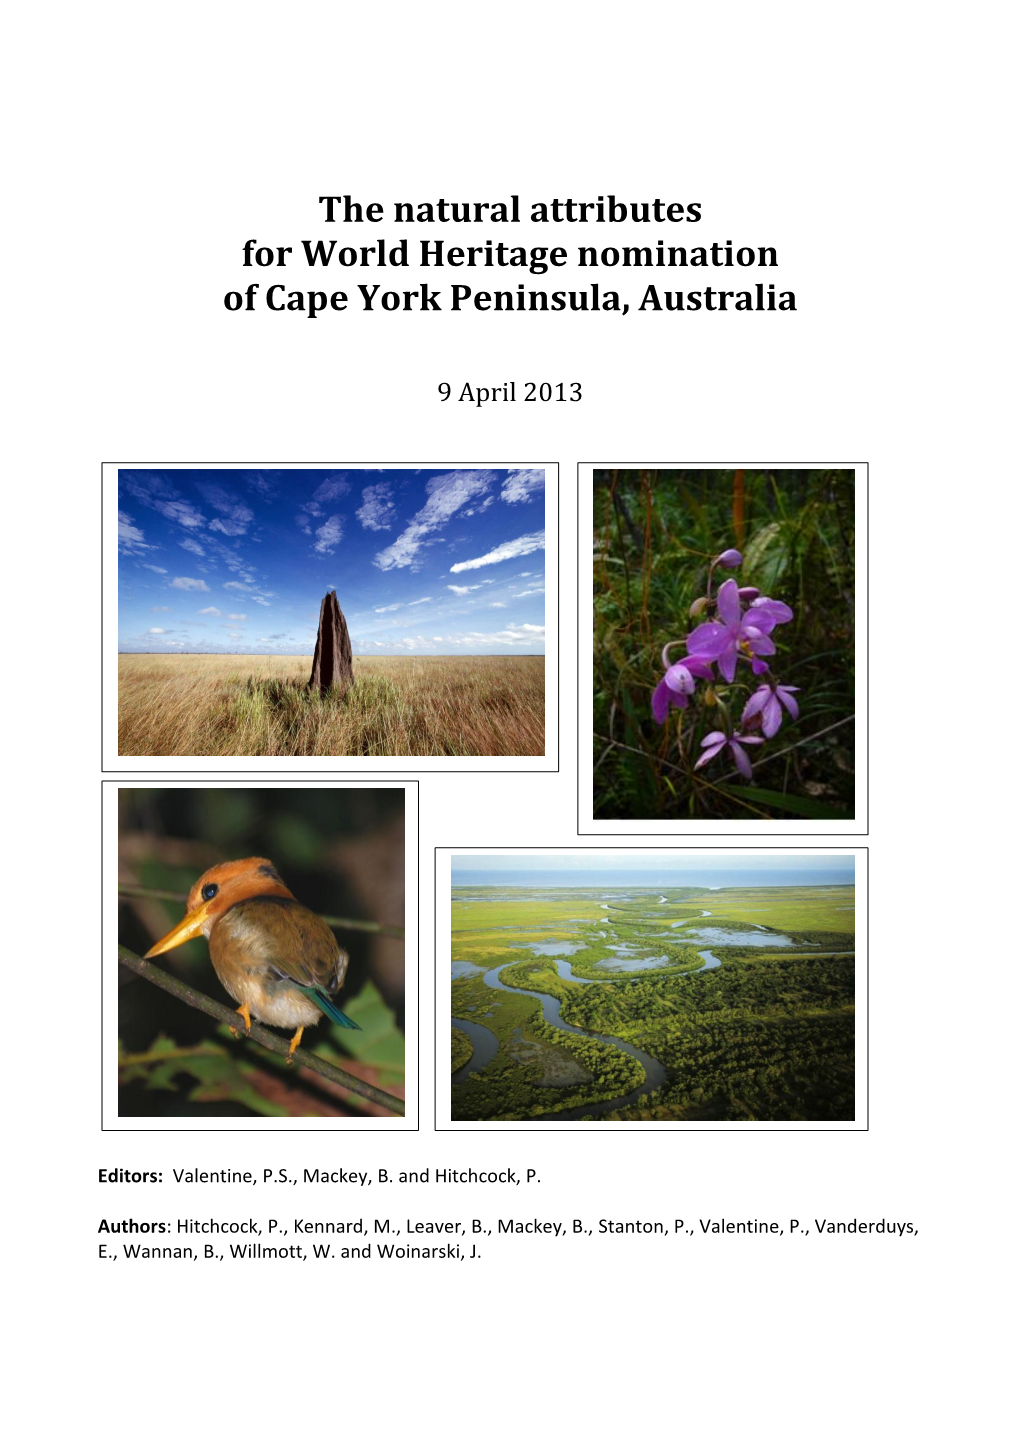 The Natural Attributes for World Heritage Nomination of Cape York Peninsula, Australia